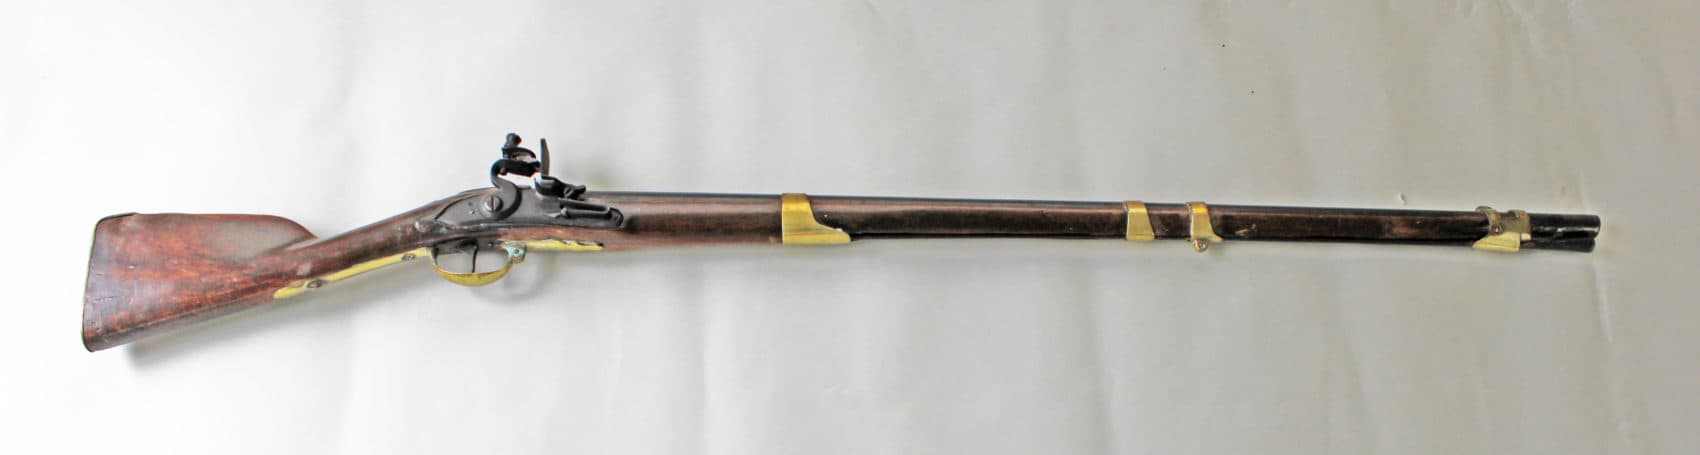 Musket That Fired 1st Shot In Battle Of Bunker Hill Up For Auction Wbur News - battle of bunker hill roblox